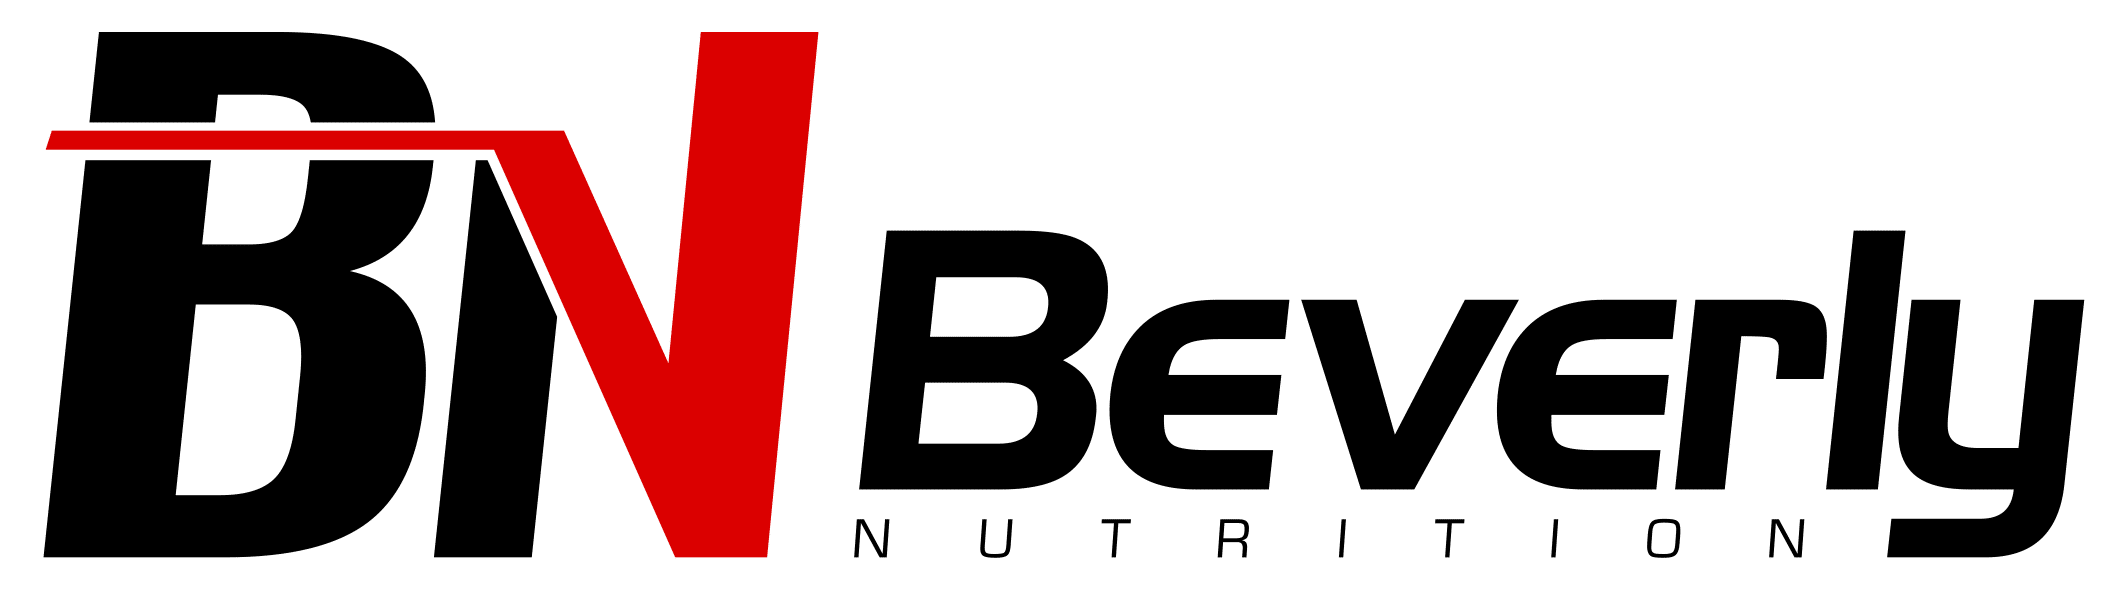 BEVERLY NUTRITION